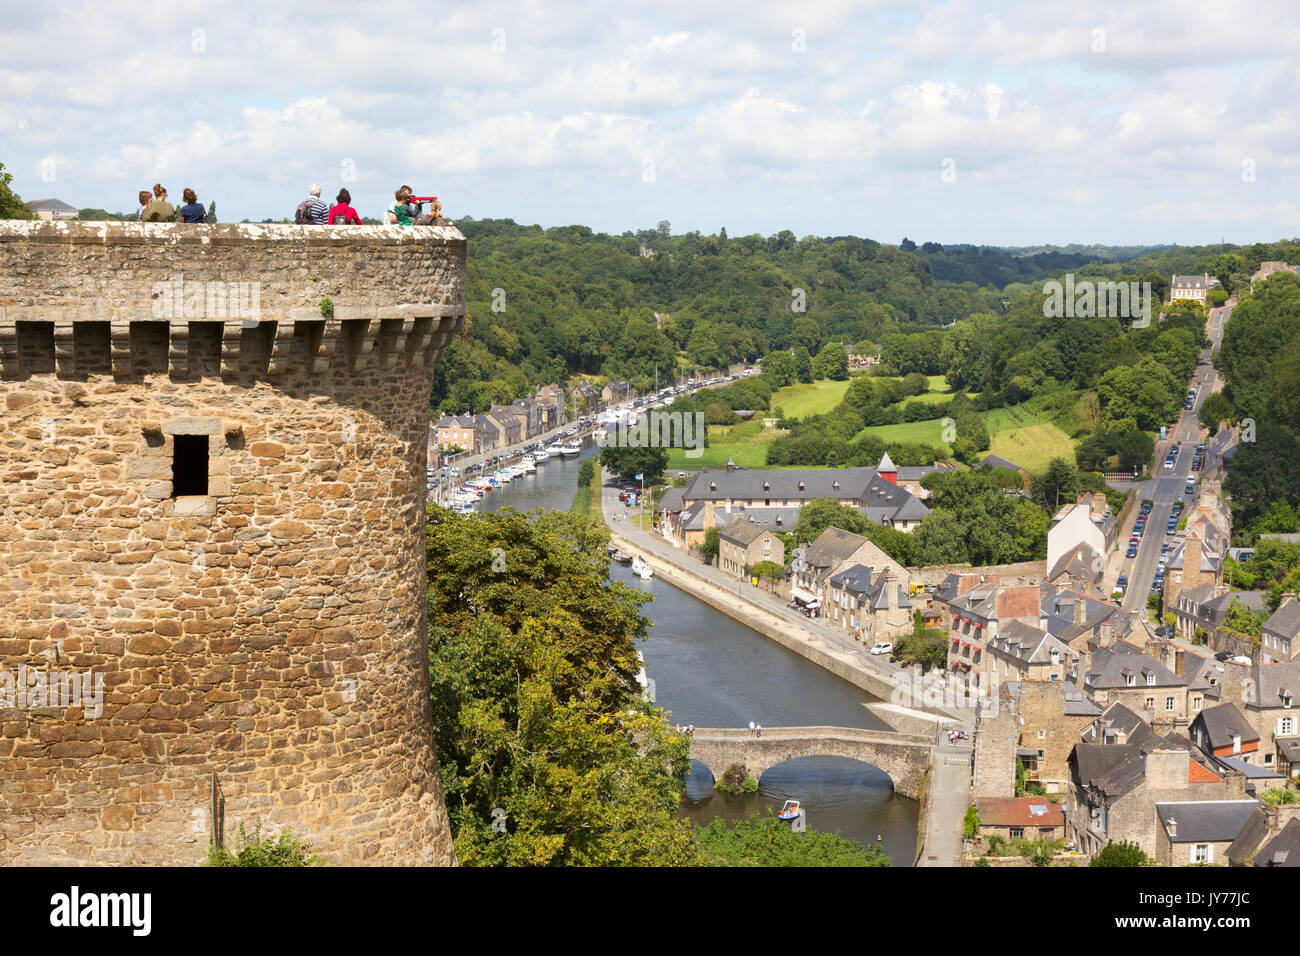 Dinan, Brittany, France - the River Rance and St Catherines Tower, part of the walls of the Old Town; Dinan France Stock Photo